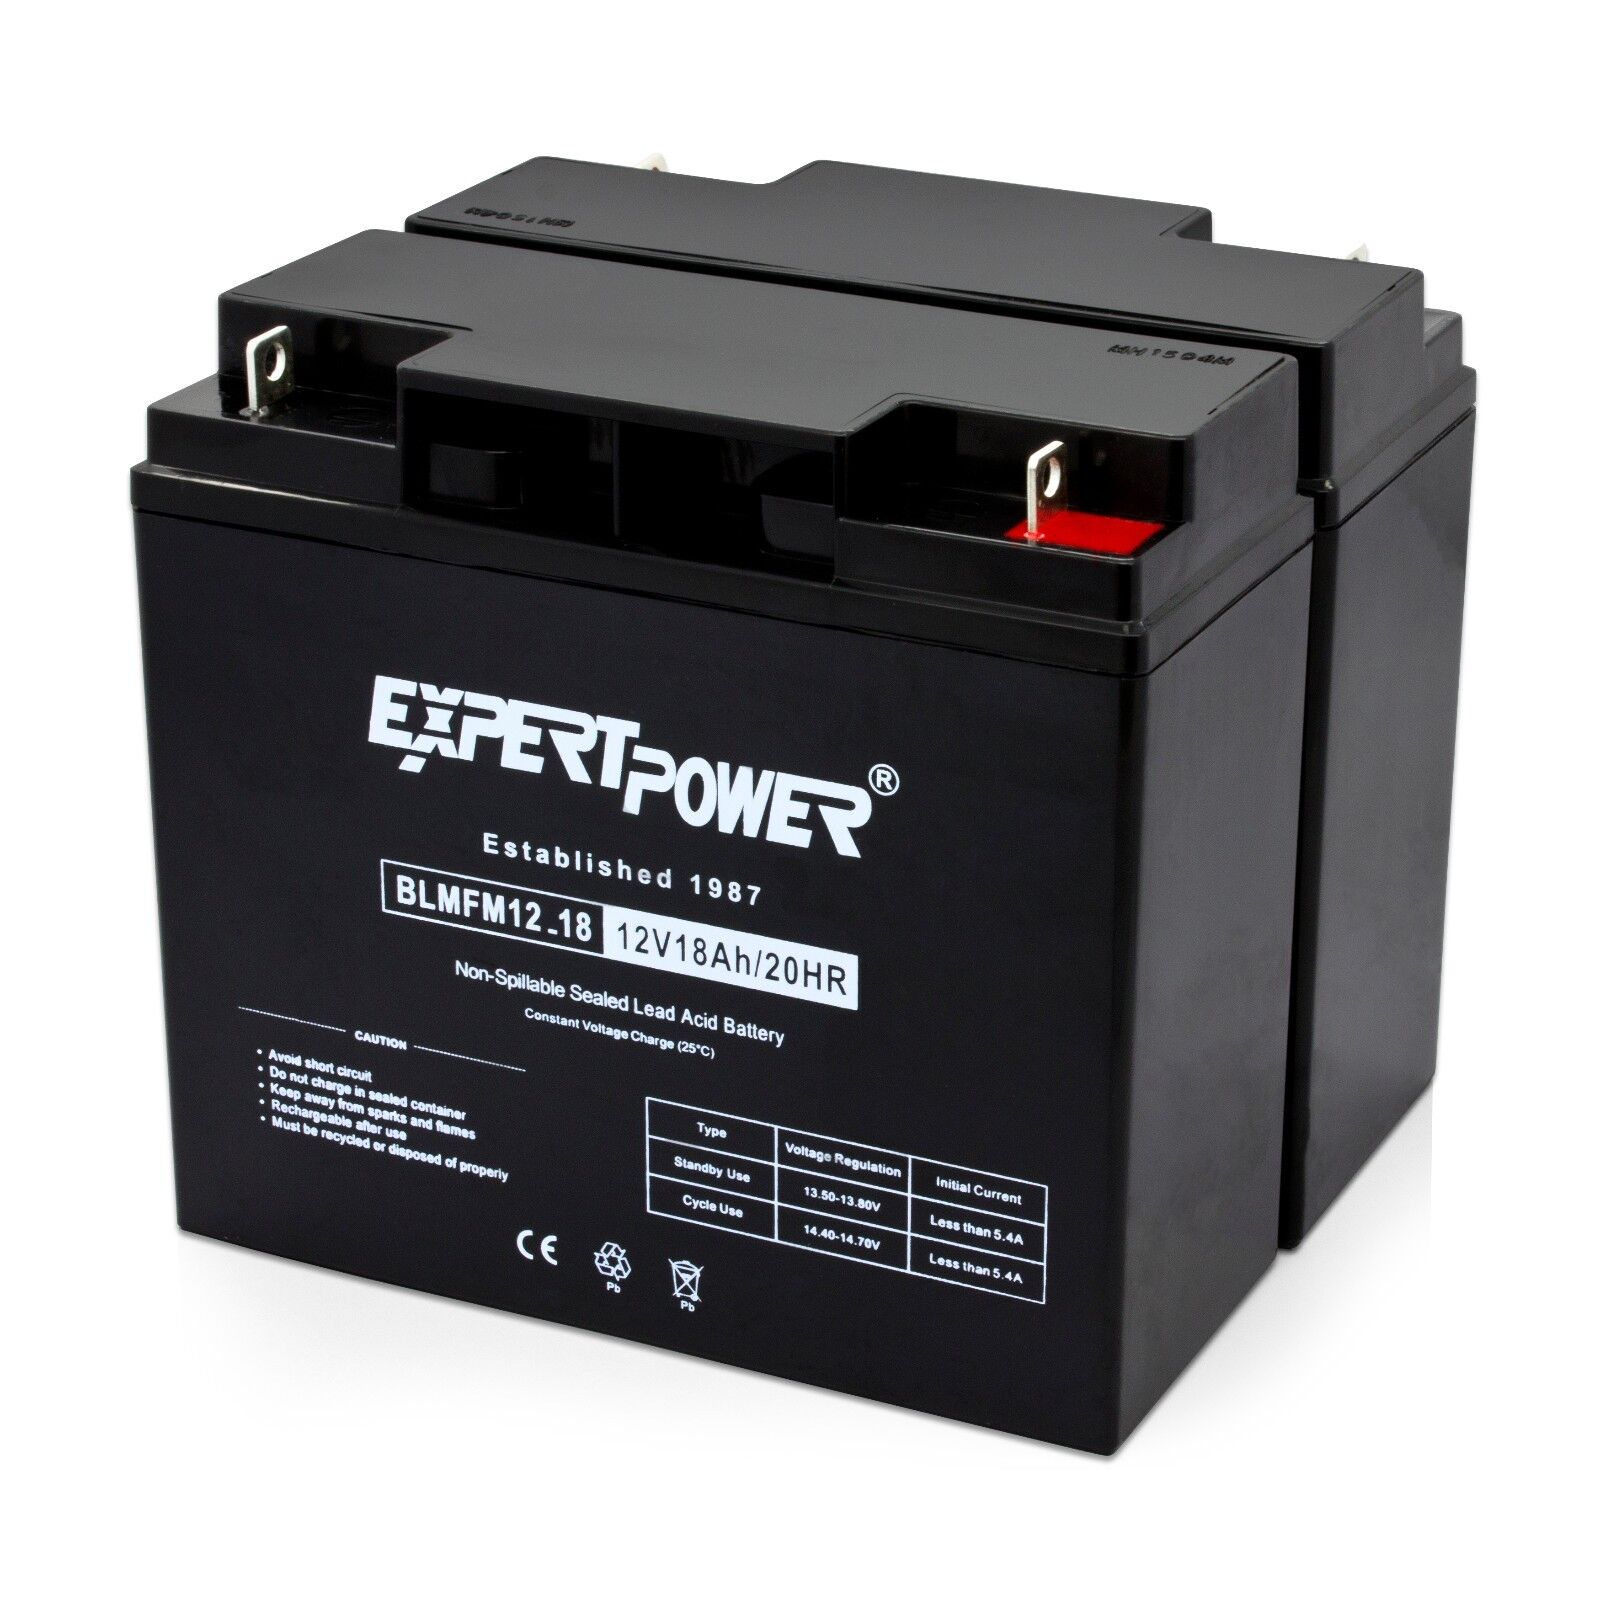 2 PACK Expert Power APC RBC7 Cartridge Battery Replacement for UPS Backup System ExpertPower EXP12180 - фотография #3